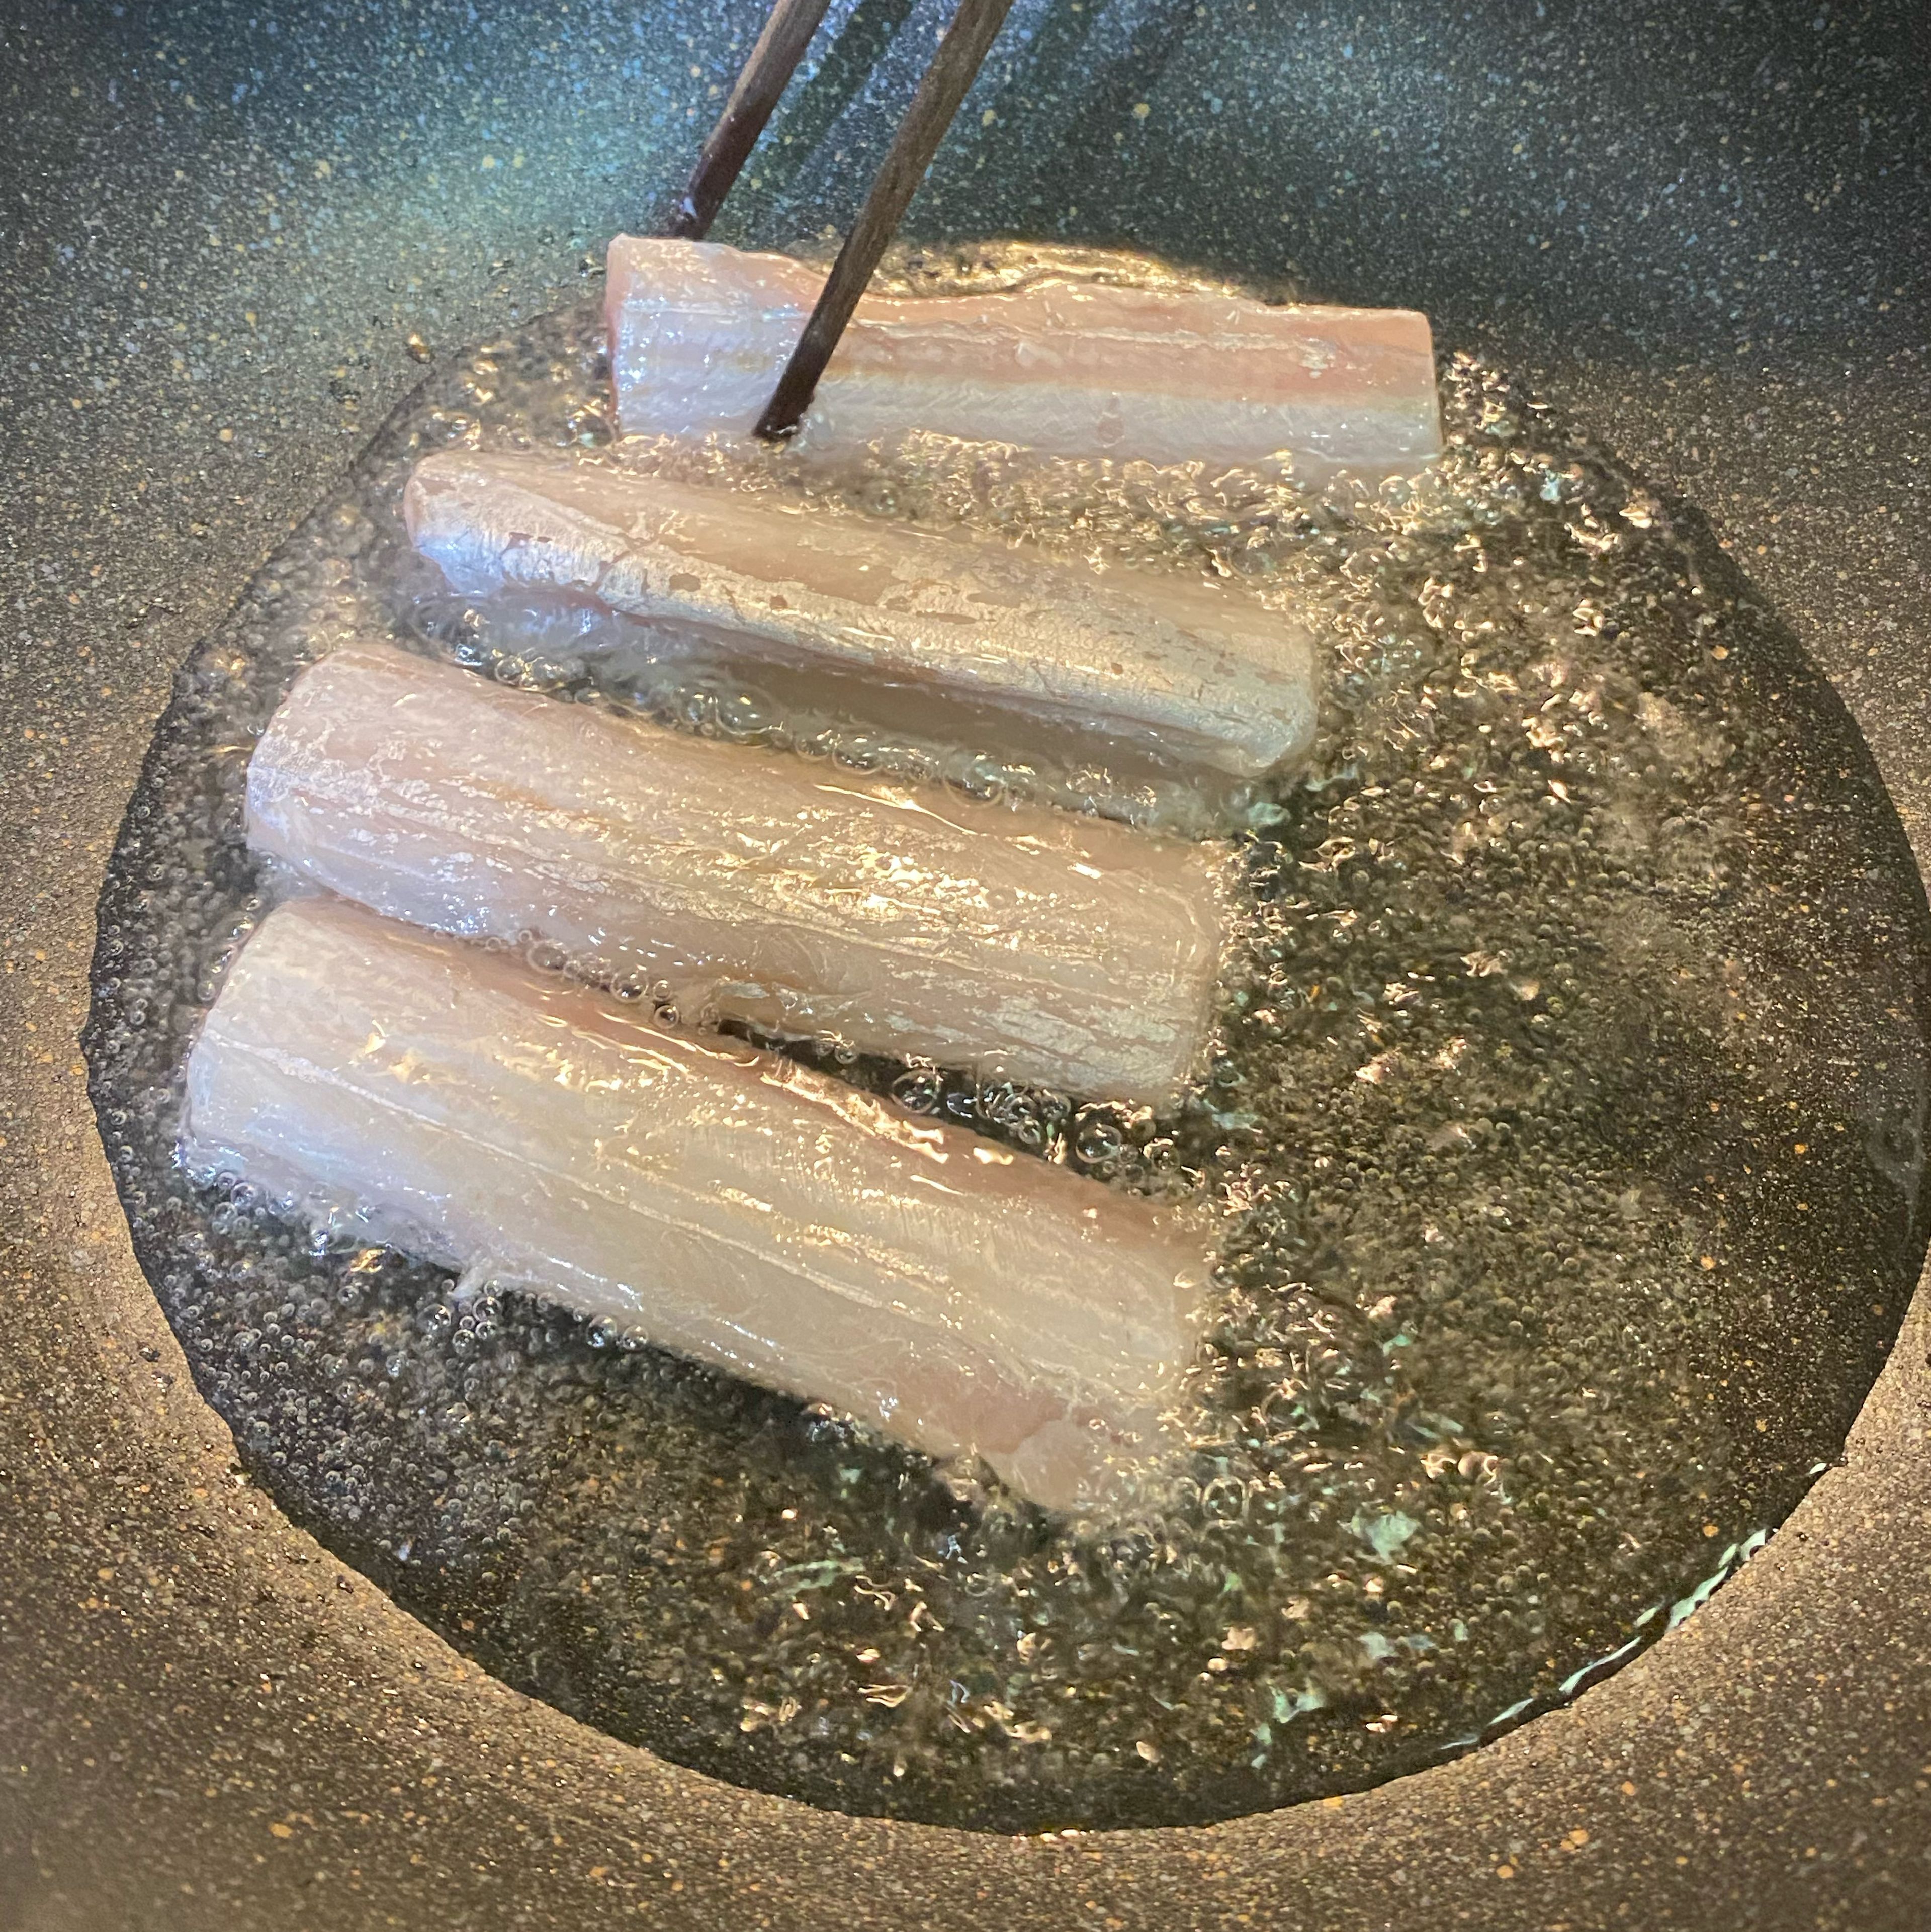 When the oil forms bubbles when you stick the chopsticks in it, it’s ready for frying. Turn heat down to medium. Carefully add each fish into the pan; don’t crowd them. Use a pan cover if oil is splattering out.